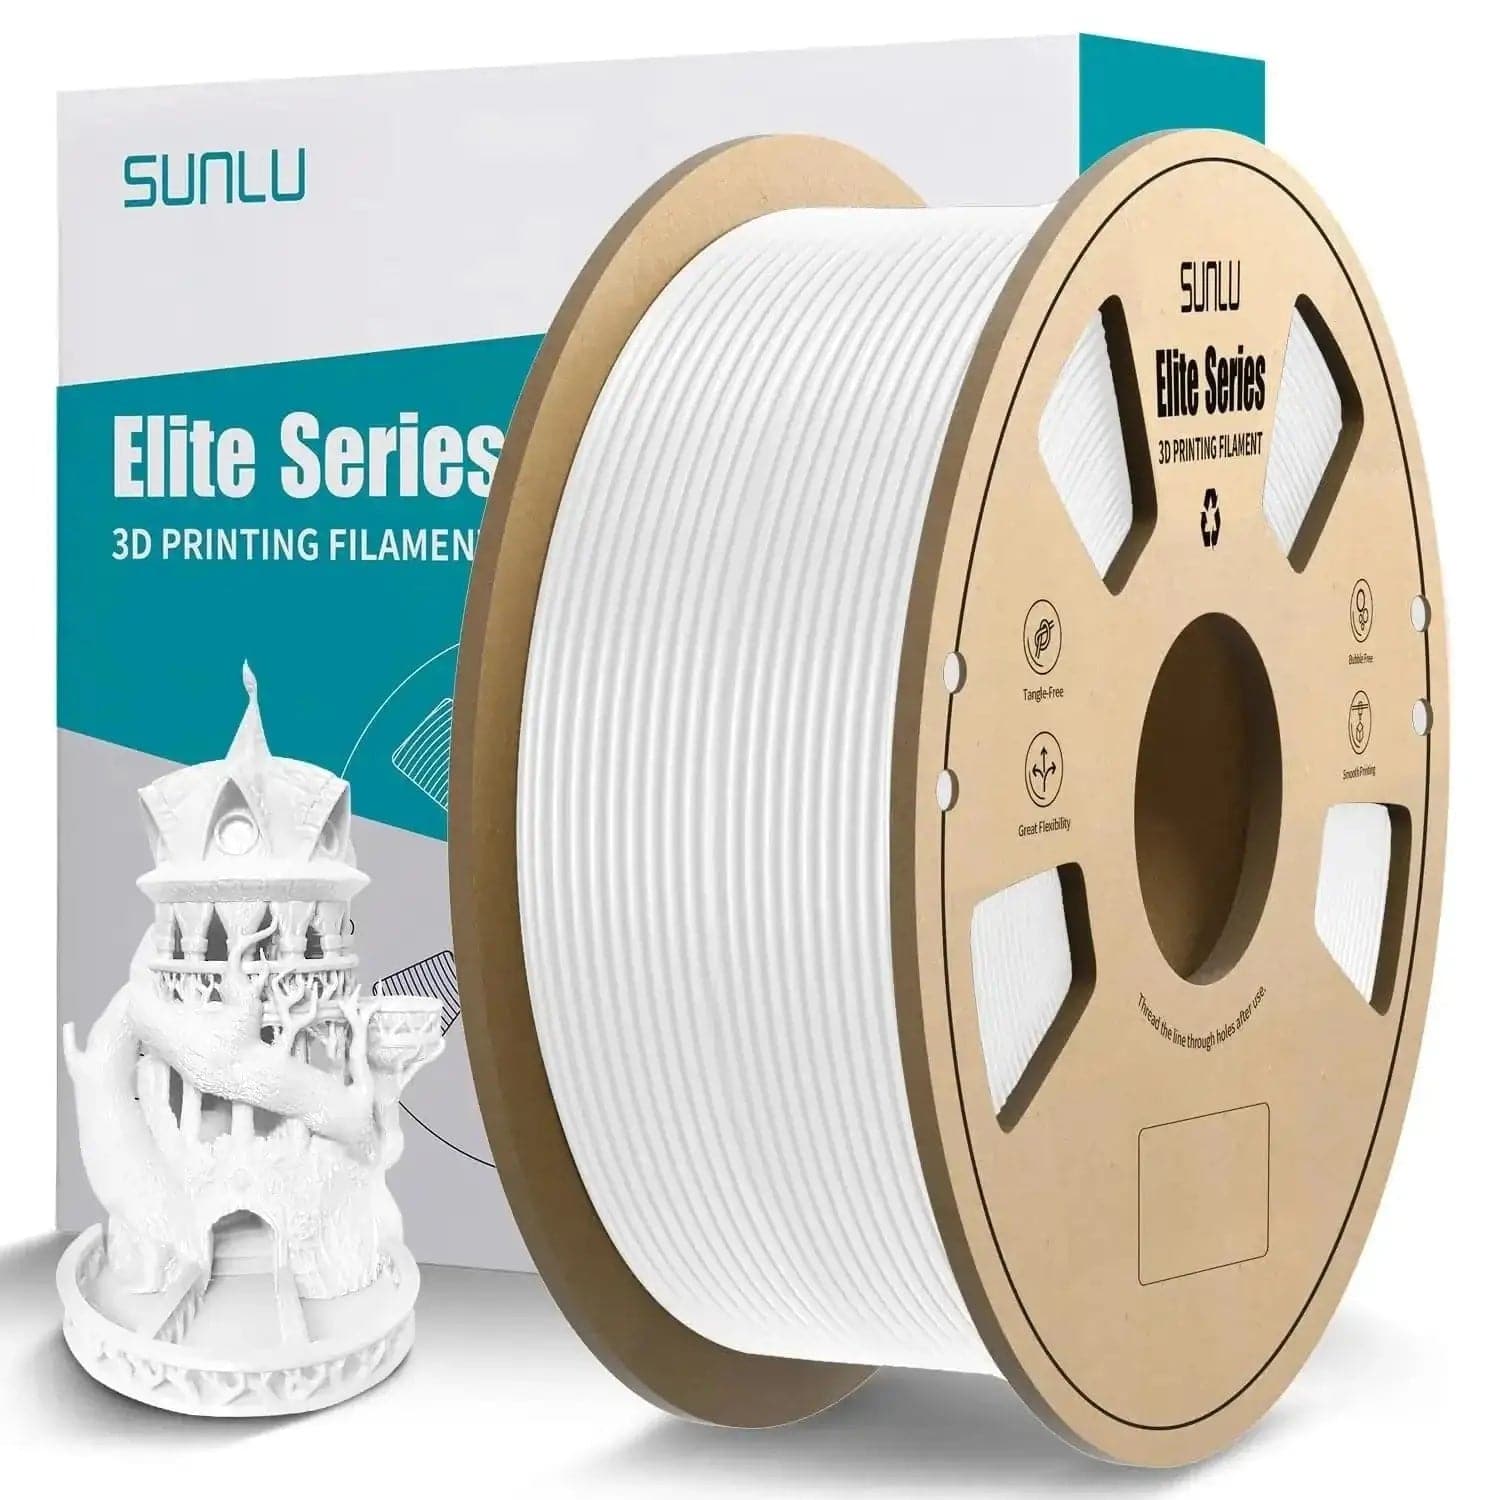 Over 10kg Filament Combo-SUNLU Elite PLA 3D Printer Filament 1.75mm 1K
✅【Ship From Amazon】Same shipping service with Amazon. Enjoy reliable performance and fast shipping with the Amazon FBA Warehouse.
✅【SUNLU PLA Filament 1.75mm】Dimens10kg Filament Combo-SUNLU Elite PLA 3D Printer Filament 13D Printing Materials